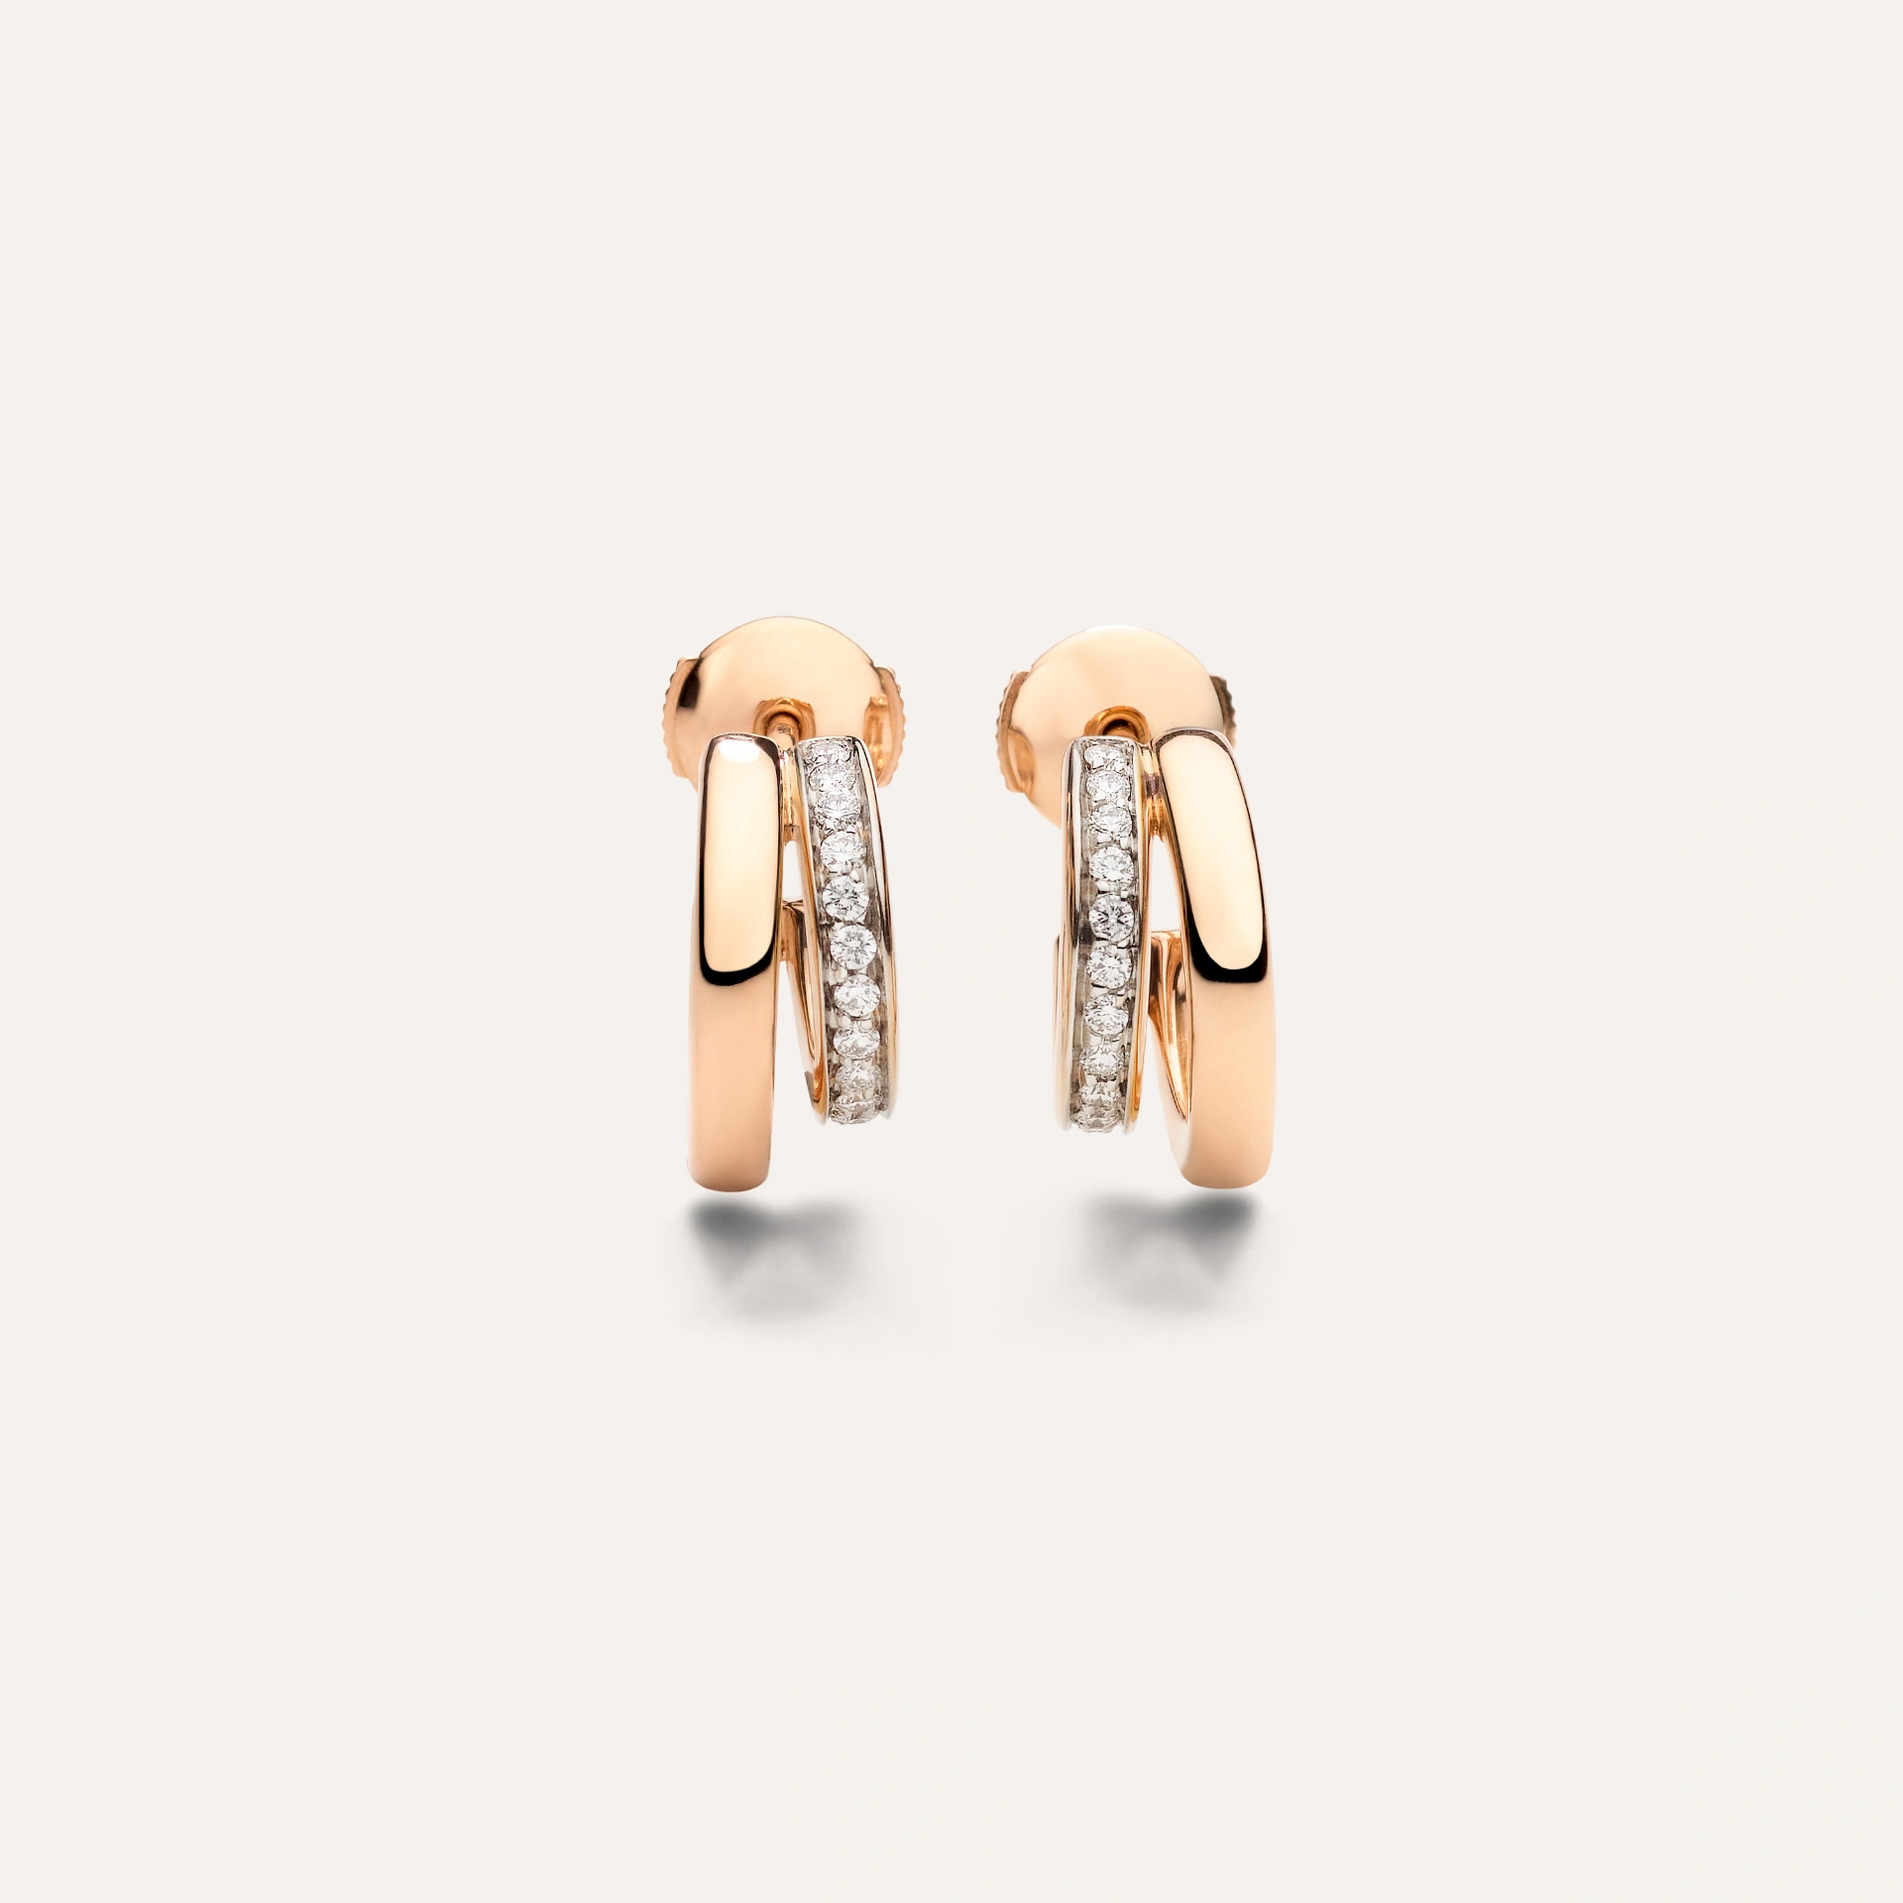 Pomellato Together Double Loop Earrings in 18k Rose Gold with White Diamonds - Orsini Jewellers